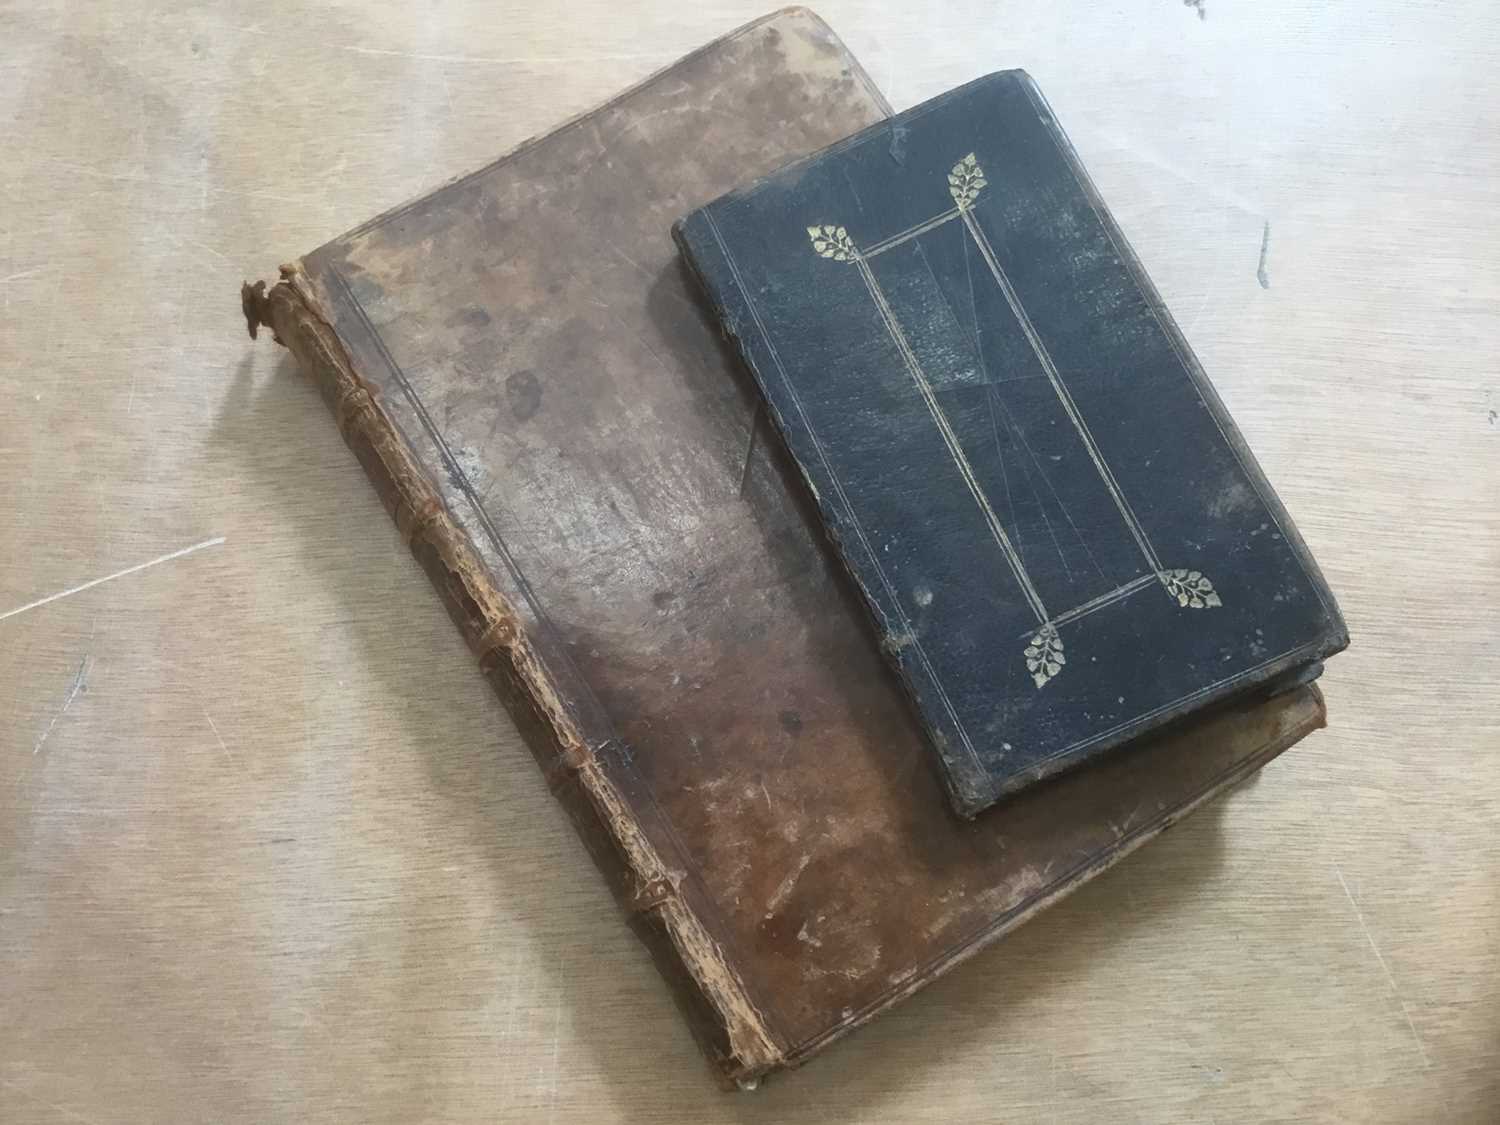 18th century French hand written song book, together with 1692 book of prayers